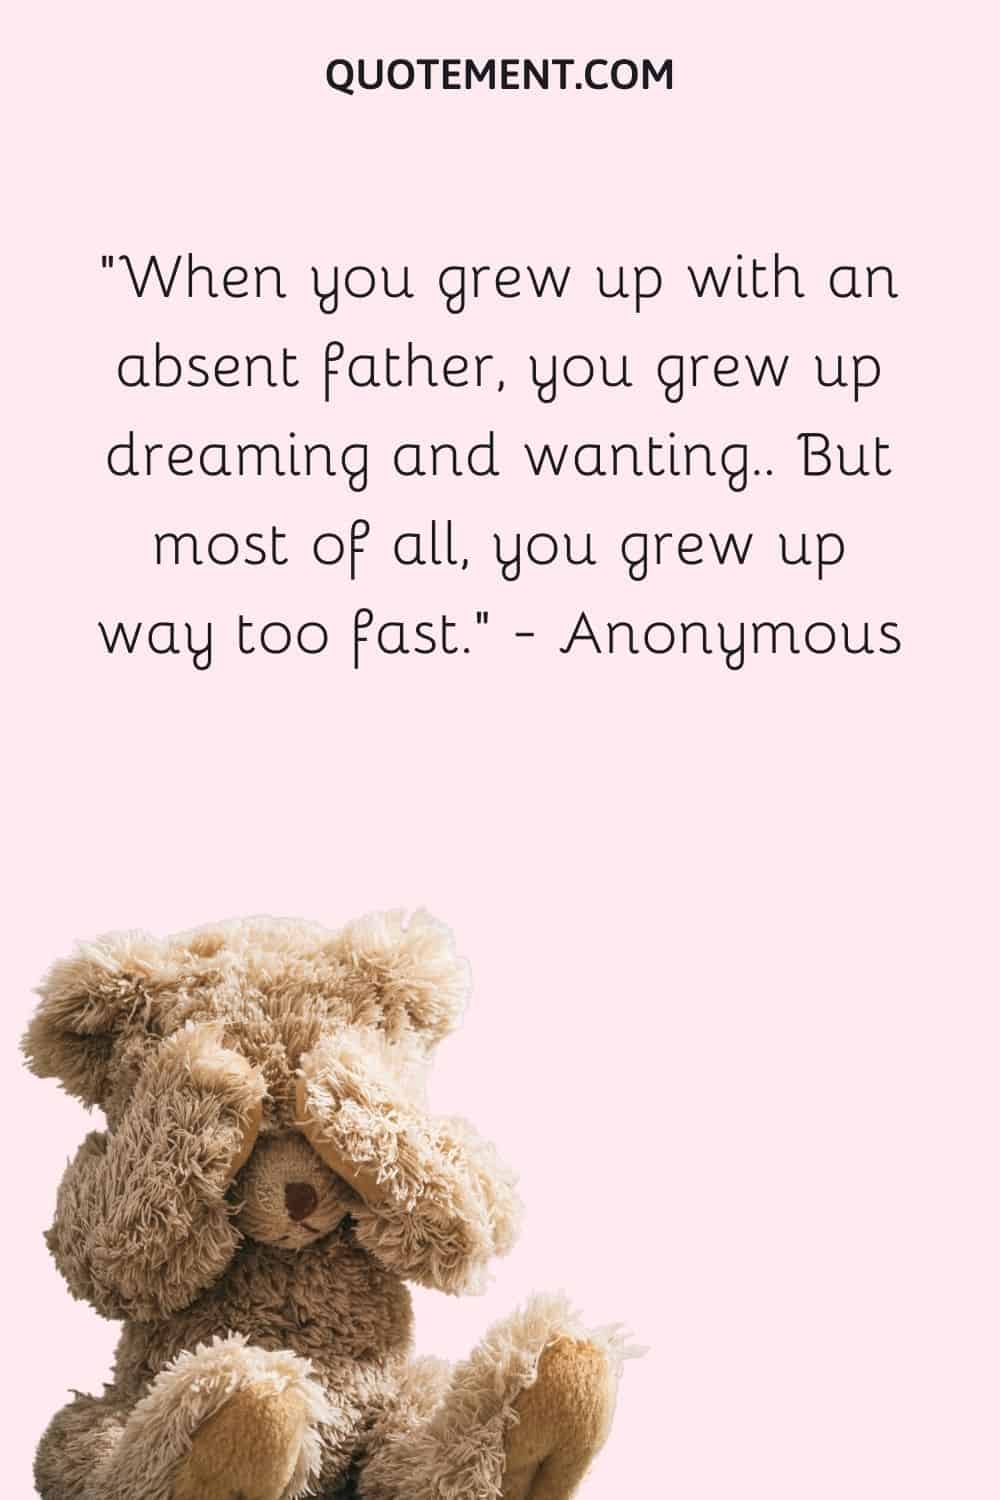 When you grew up with an absent father, you grew up dreaming and wanting.. But most of all, you grew up way too fast. — Anonymous